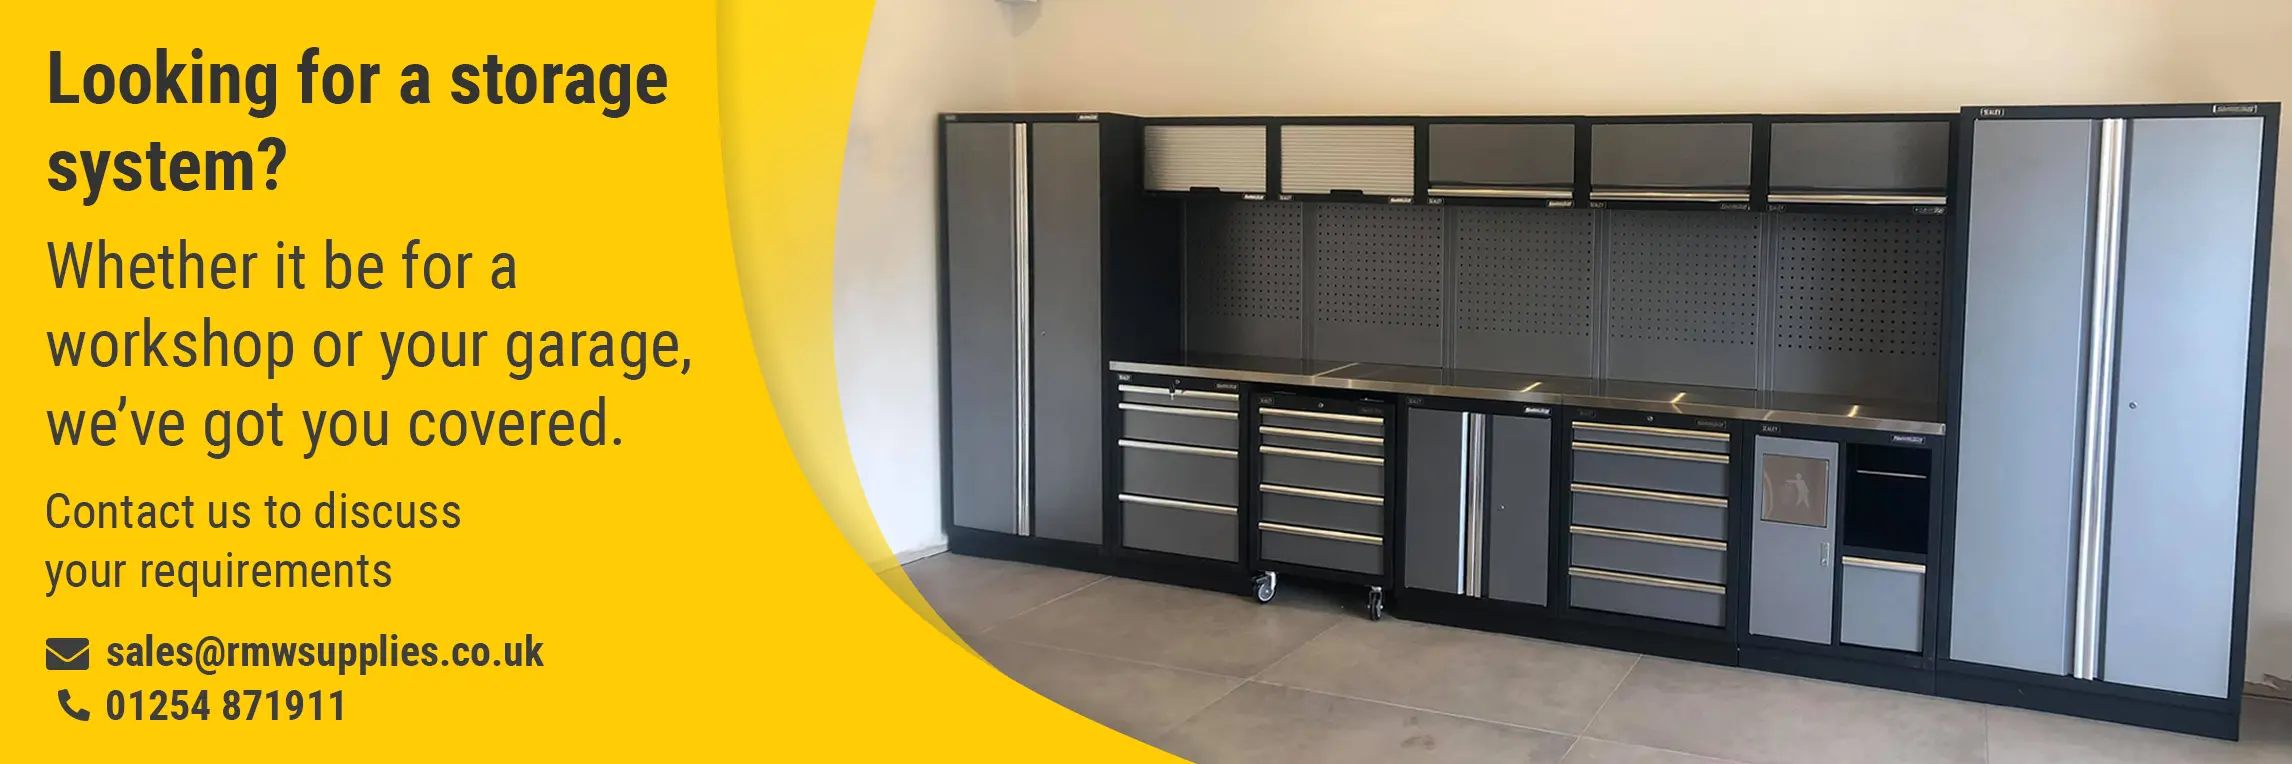 Are you looking for a storage system? Contact us for more information.